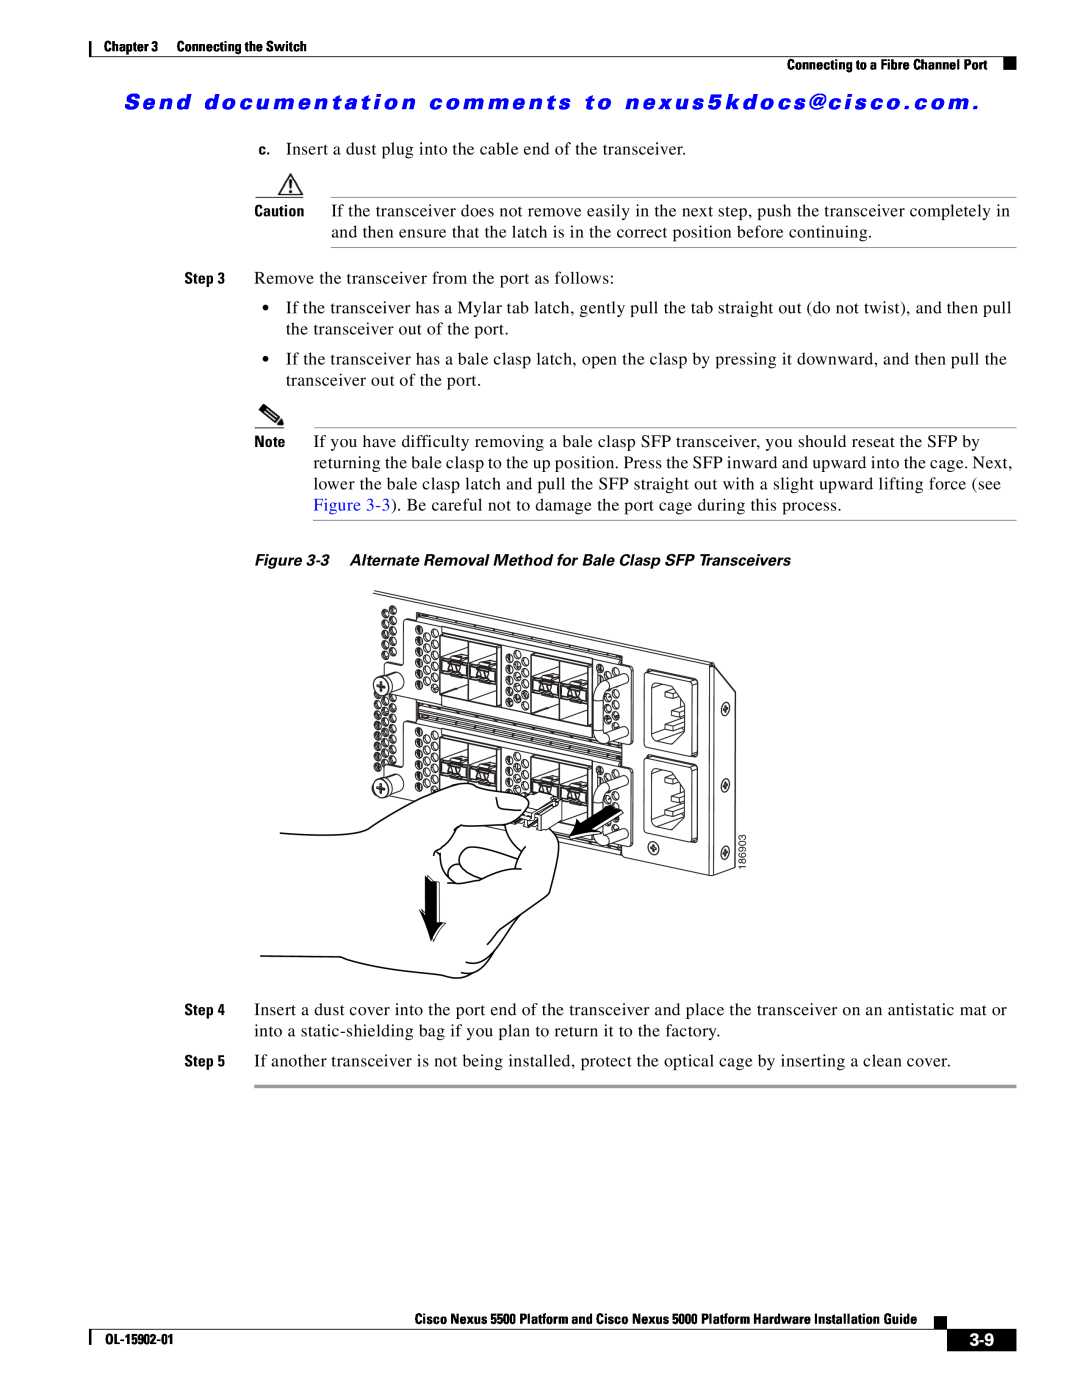 Cisco Systems 5000 manual 3 Alternate Removal Method for Bale Clasp SFP Transceivers 